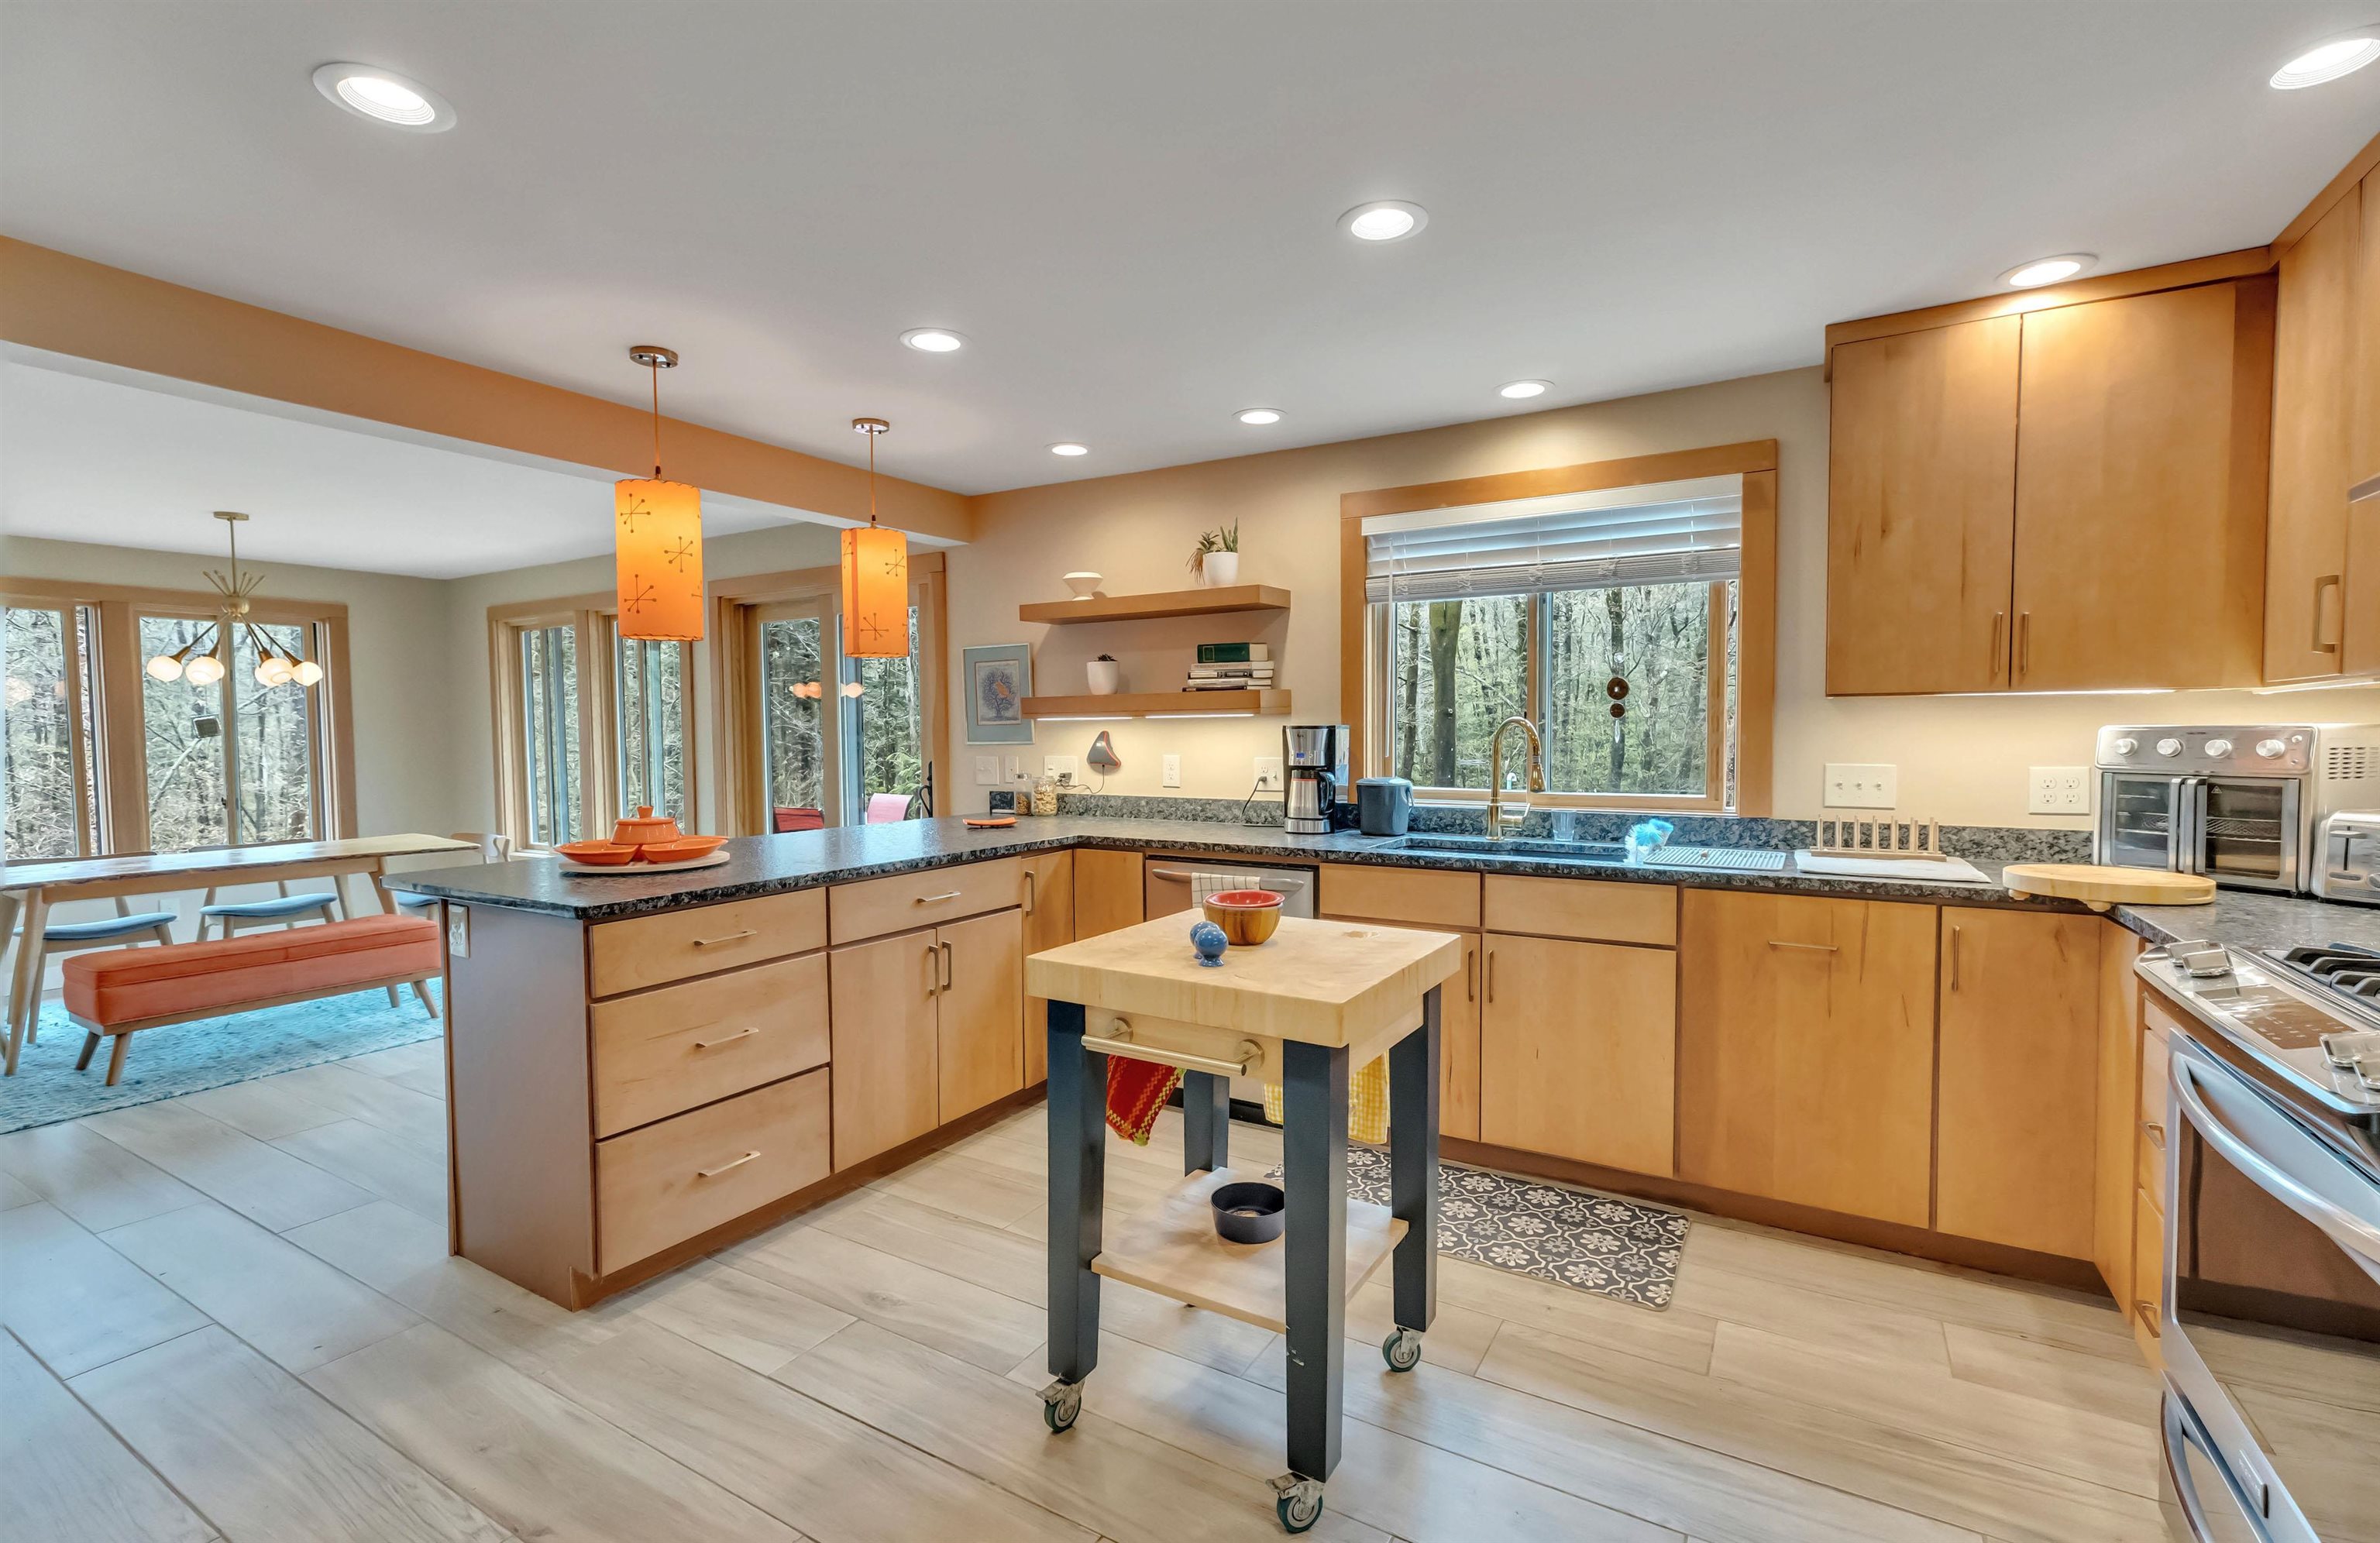 Kitchen to dining